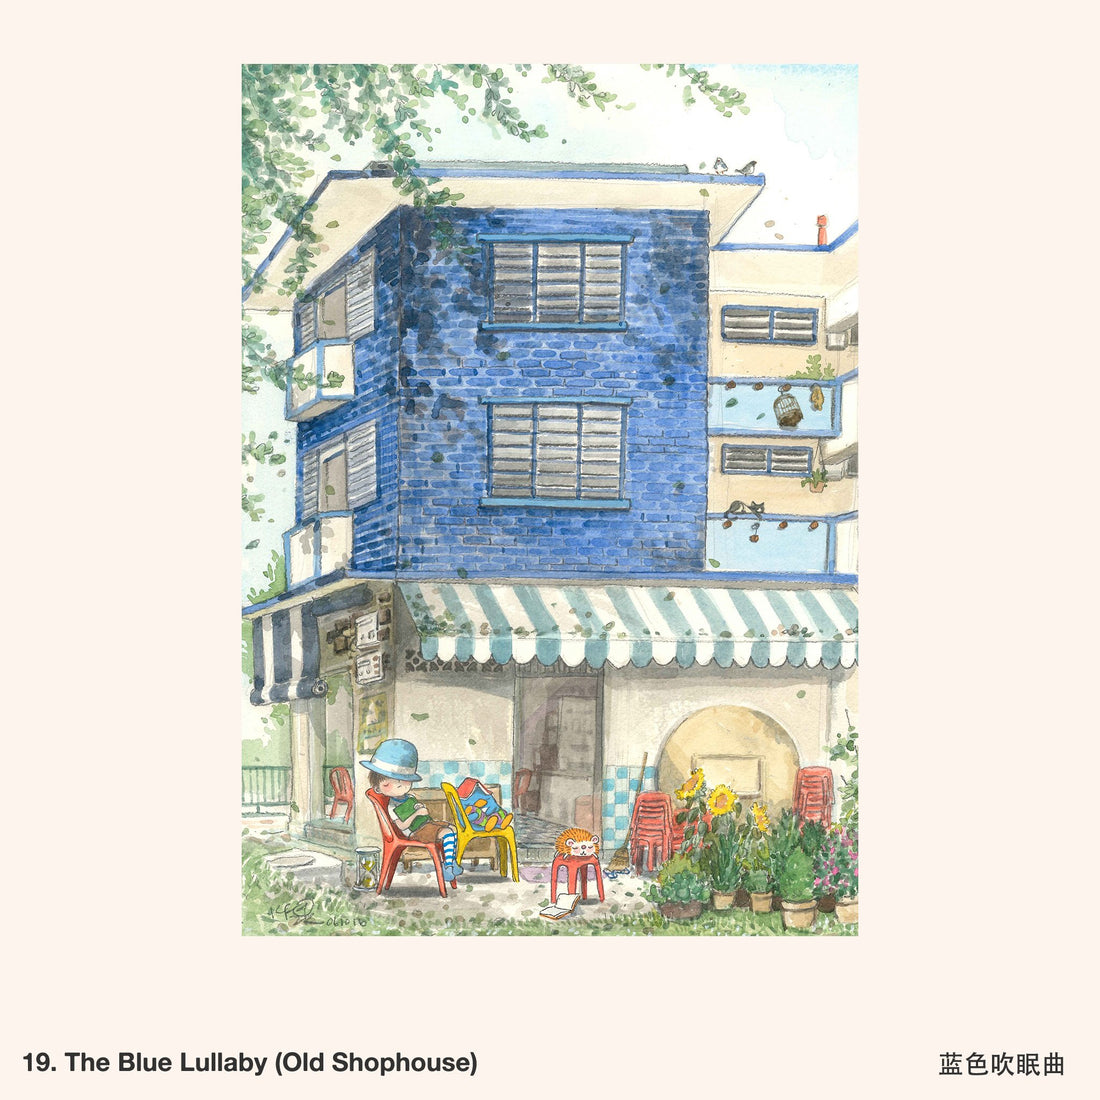 19. The Blue Lullaby (Old Shophouse) Artwork